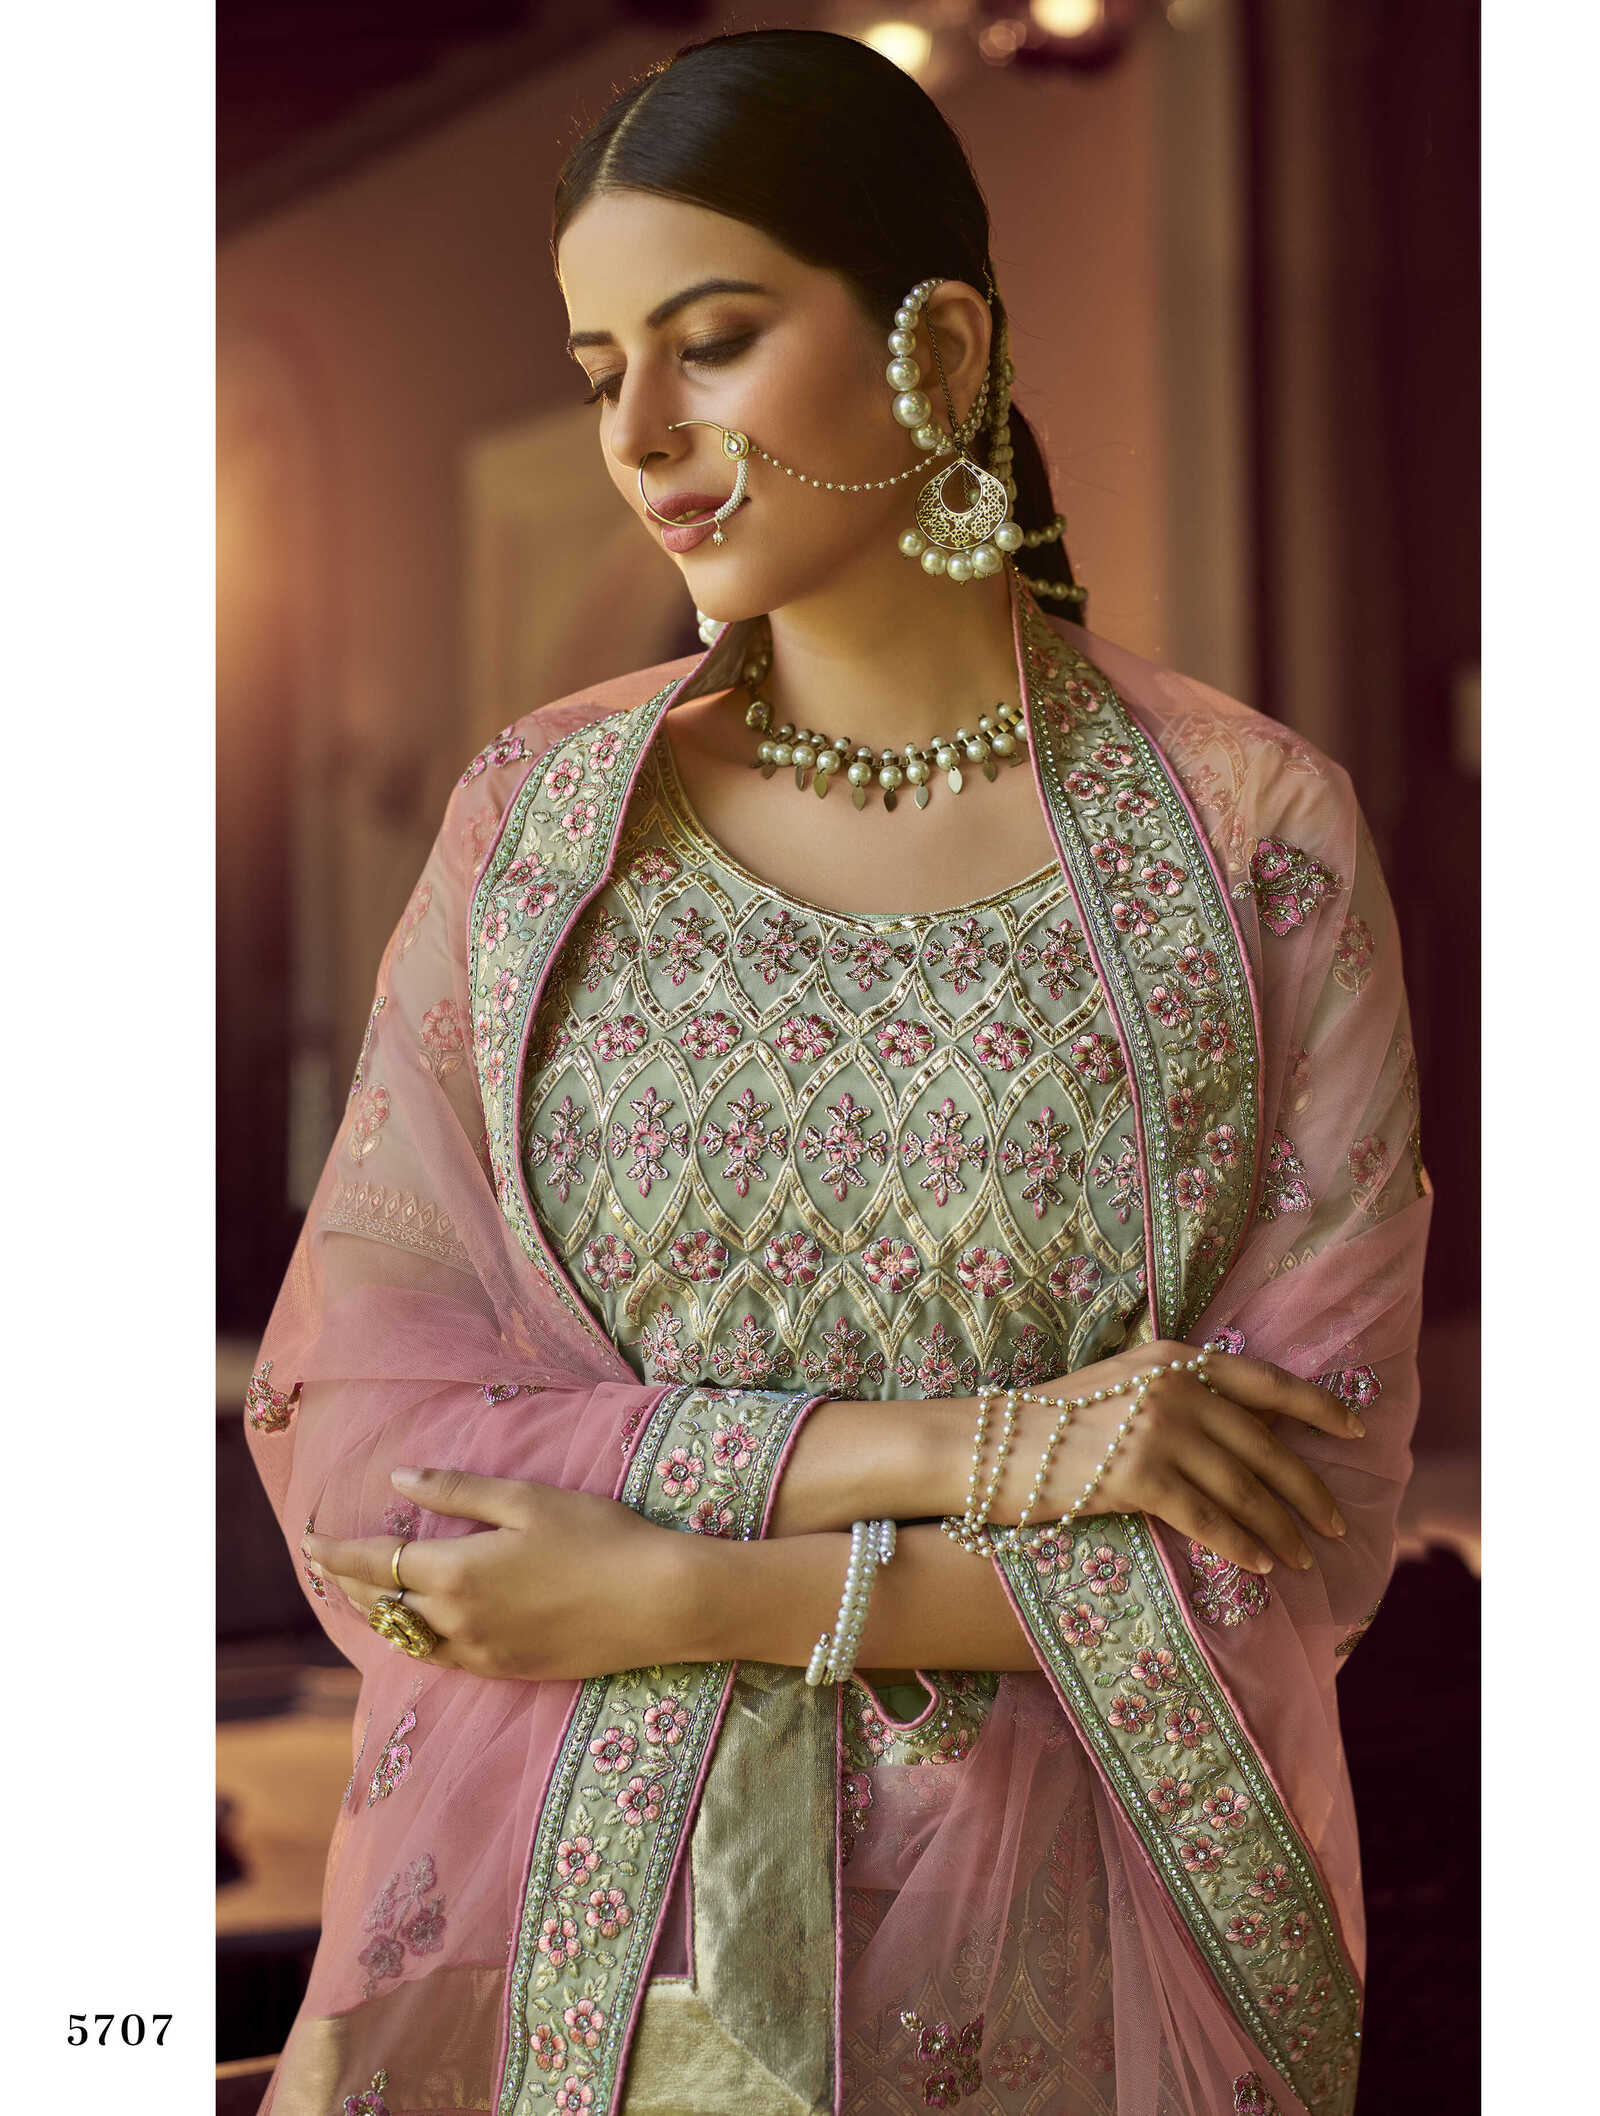 Photo of A bride in a light pink lehenga with gold and green jewellery | Lehenga  jewellery ideas, Bridal jewellery inspiration, Indian bridal photos